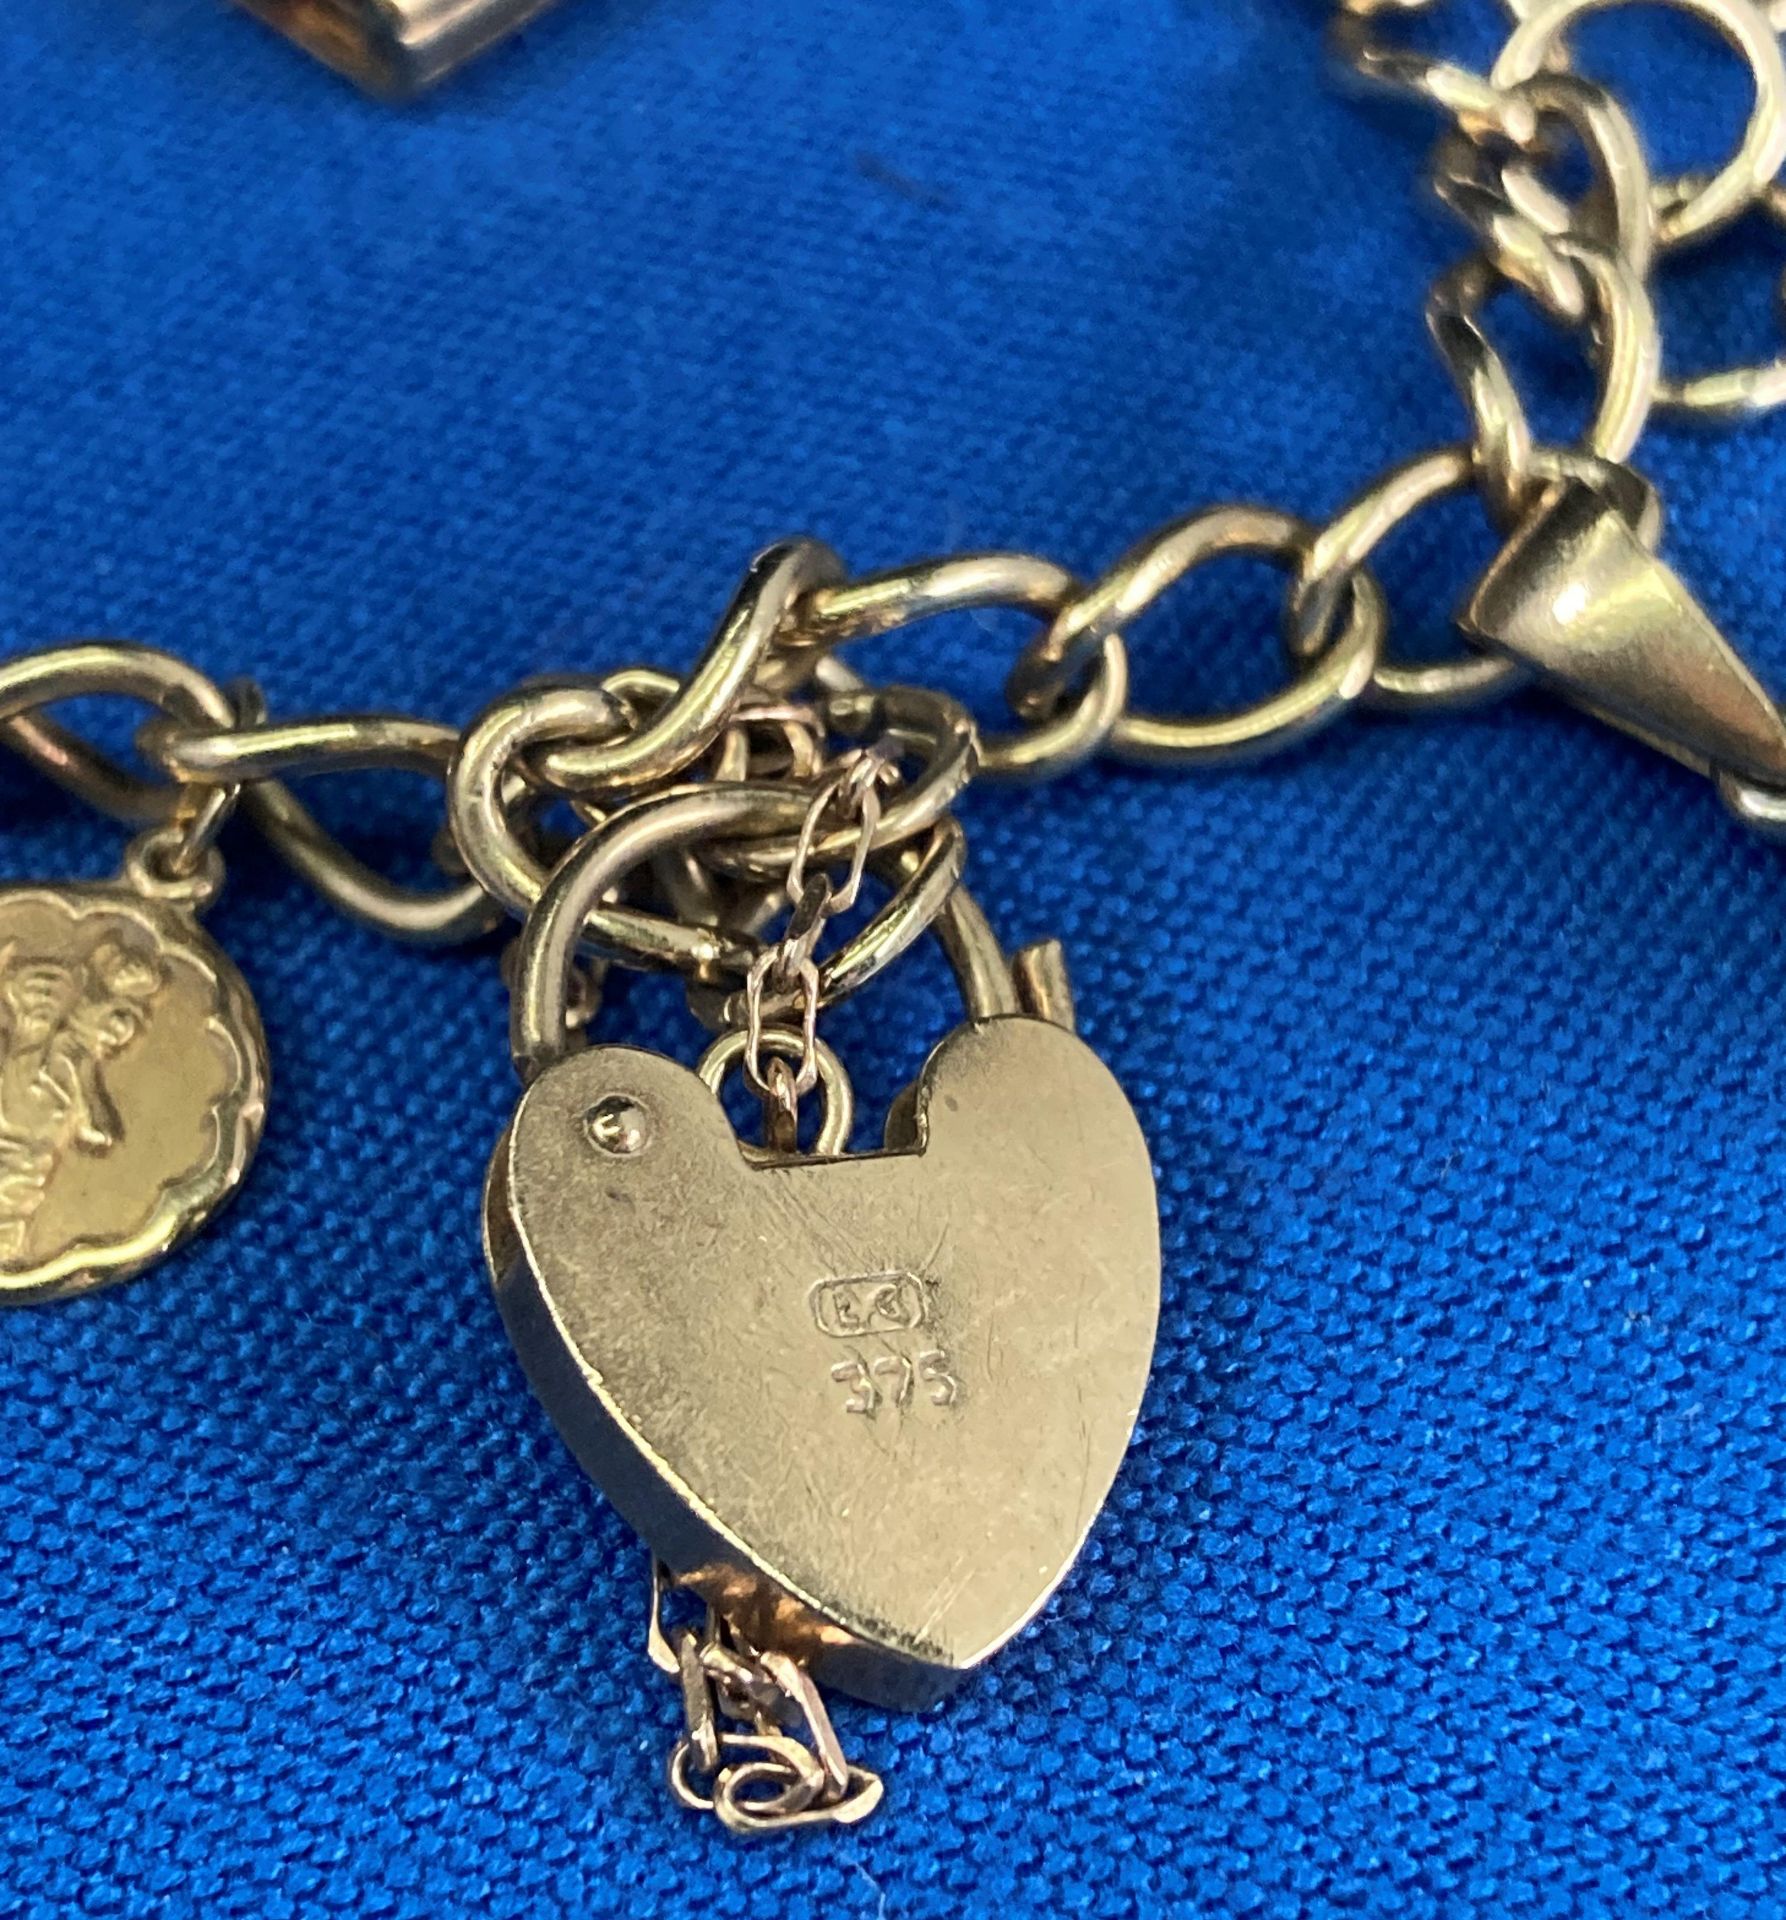 9ct gold charm gate bracelet with heart-shaped clasp and charms, 7" long. - Image 2 of 5